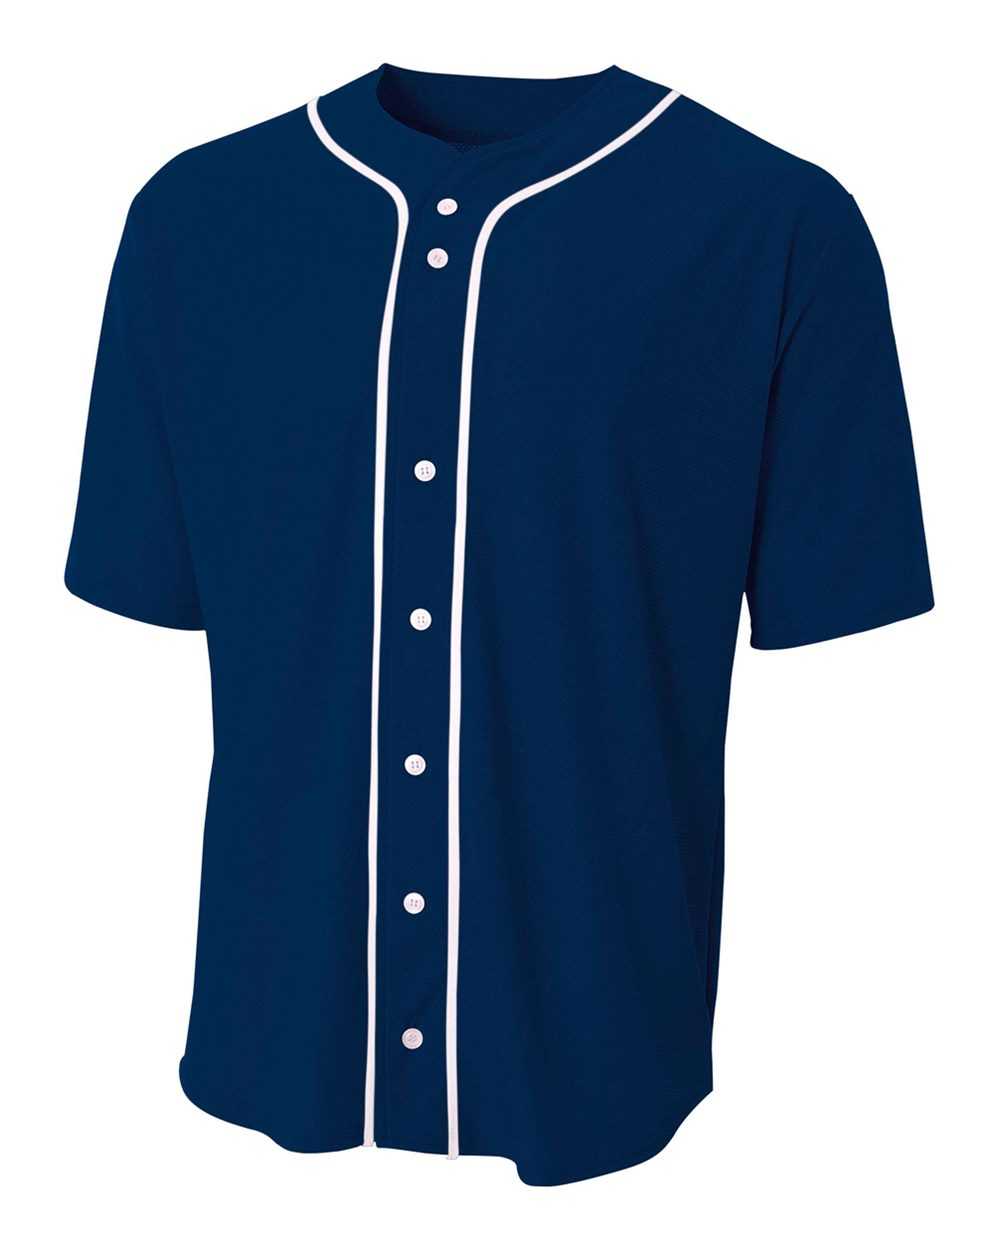 A4 N4184 Short Sleeve Full Button Baseball Top - Navy White - HIT a Double